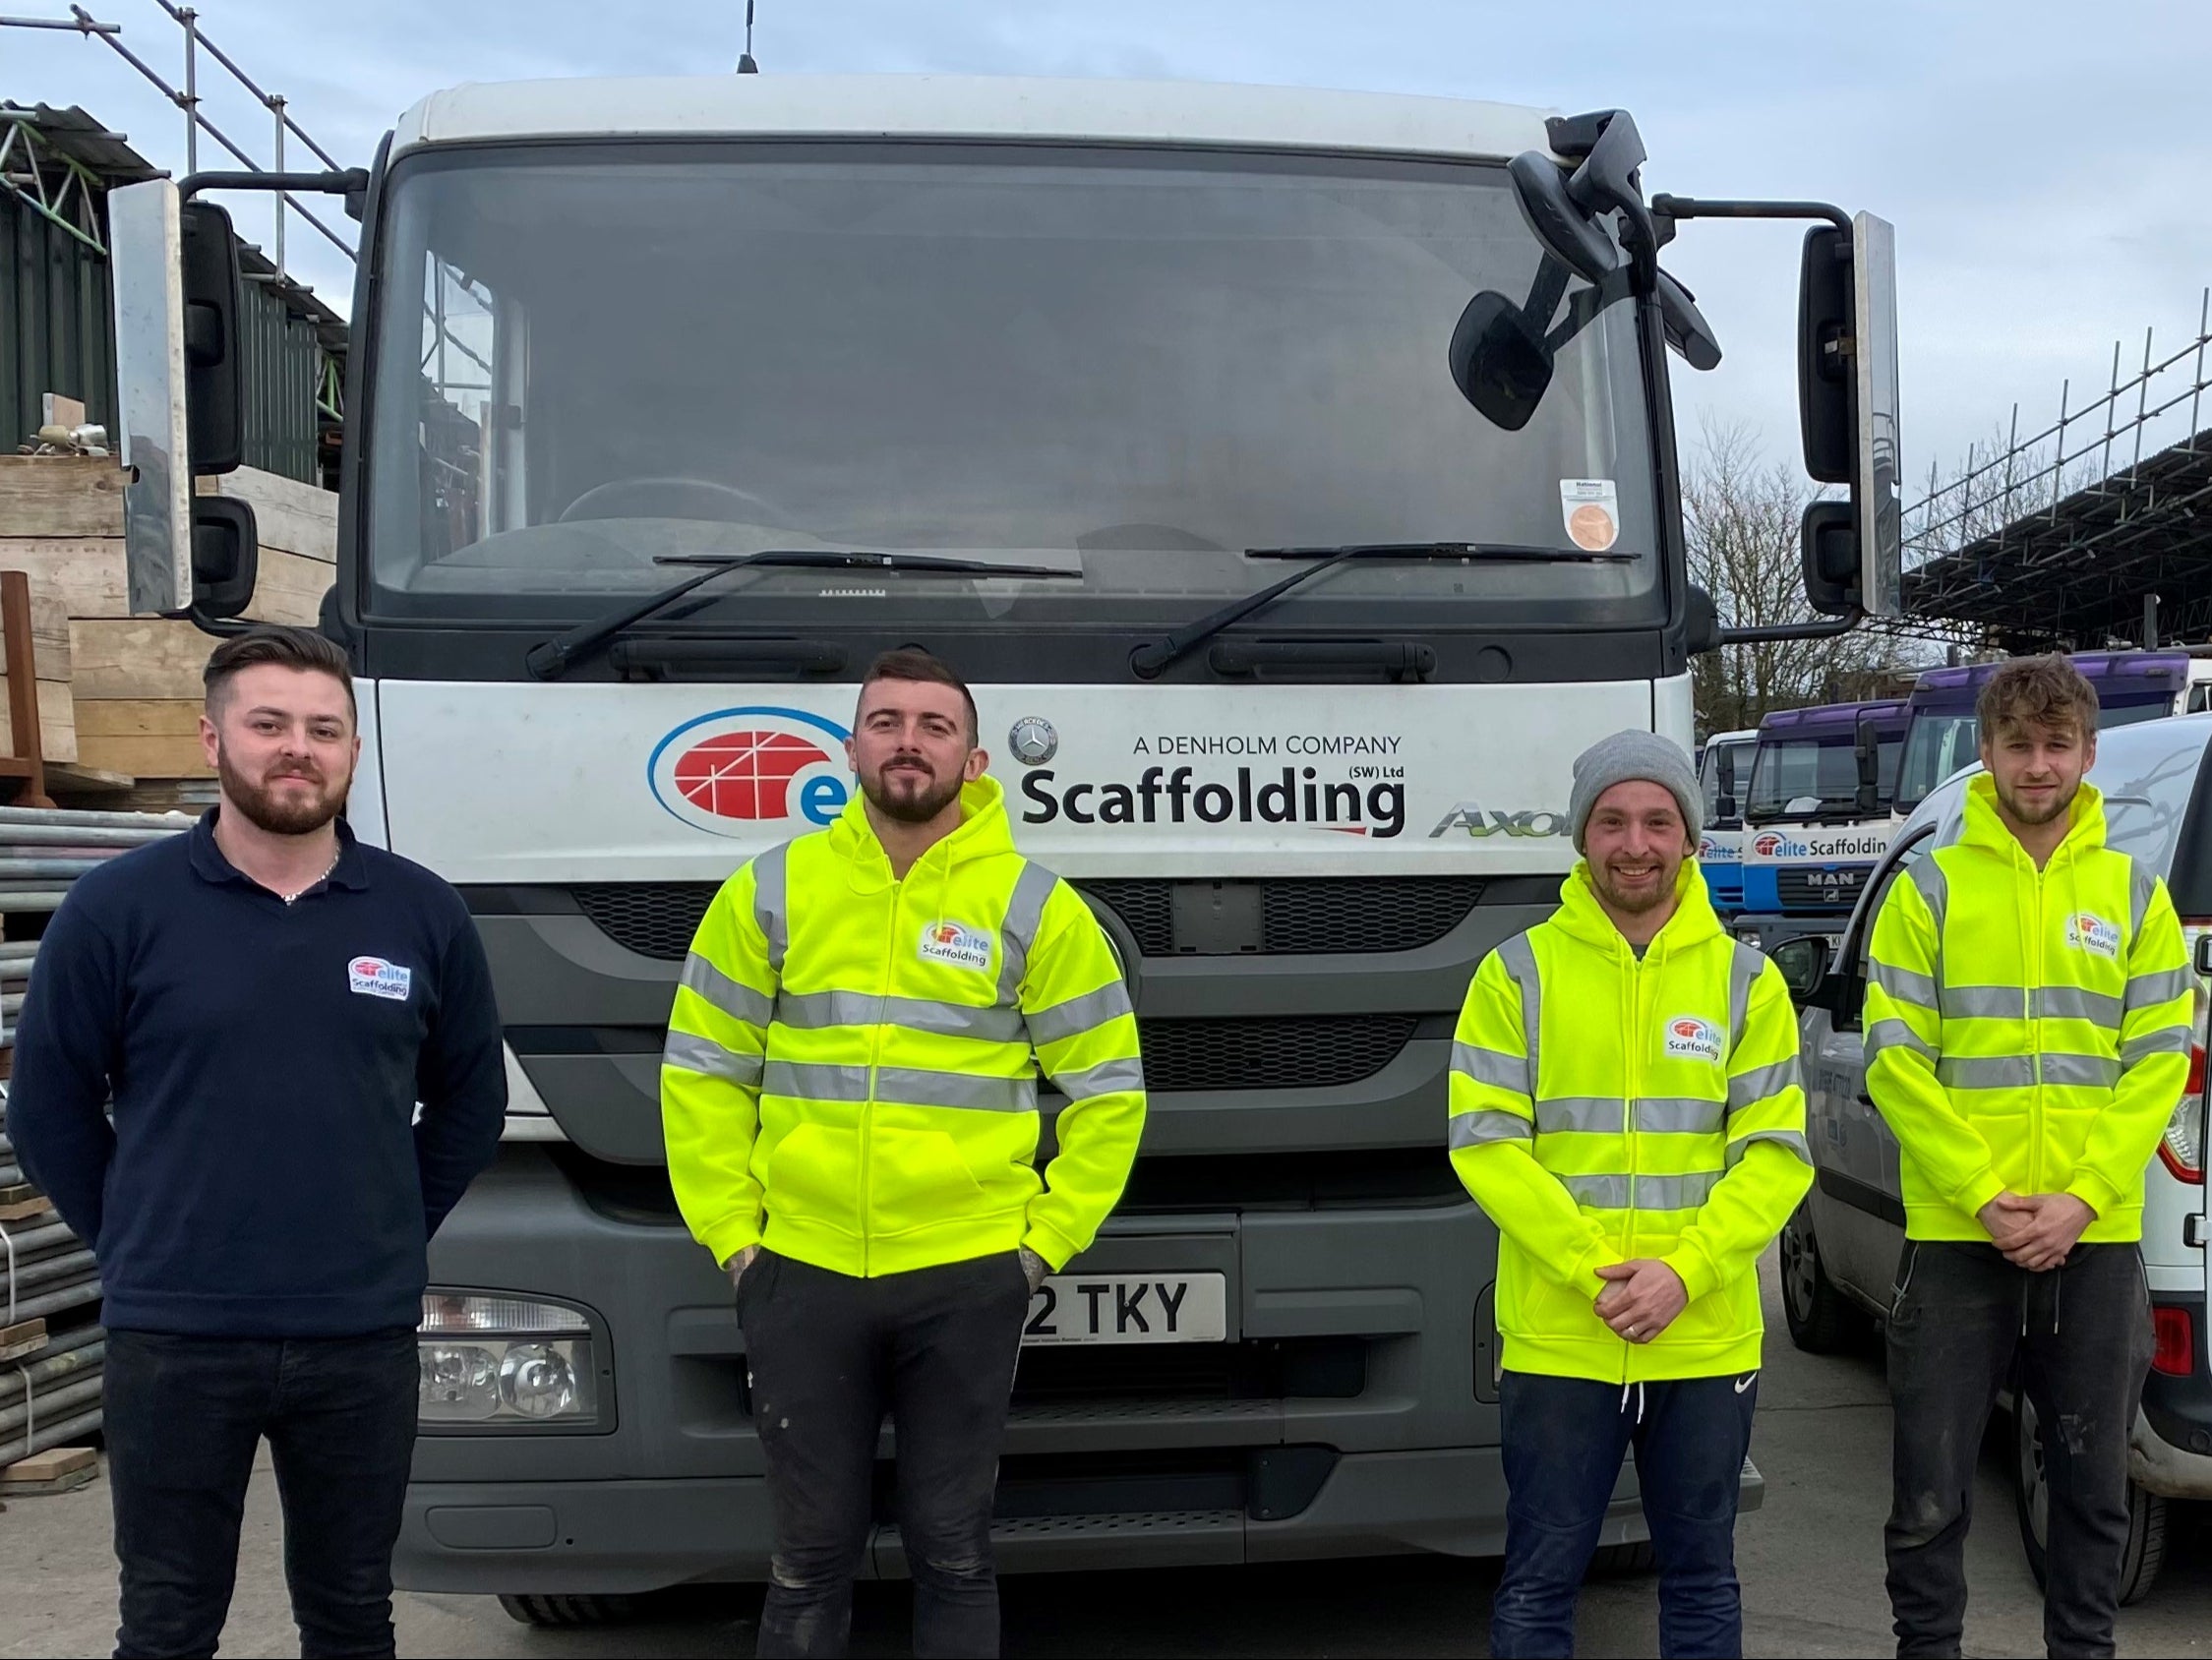 Elite Scaffolding used Jobcentre Plus to find the workforce they need